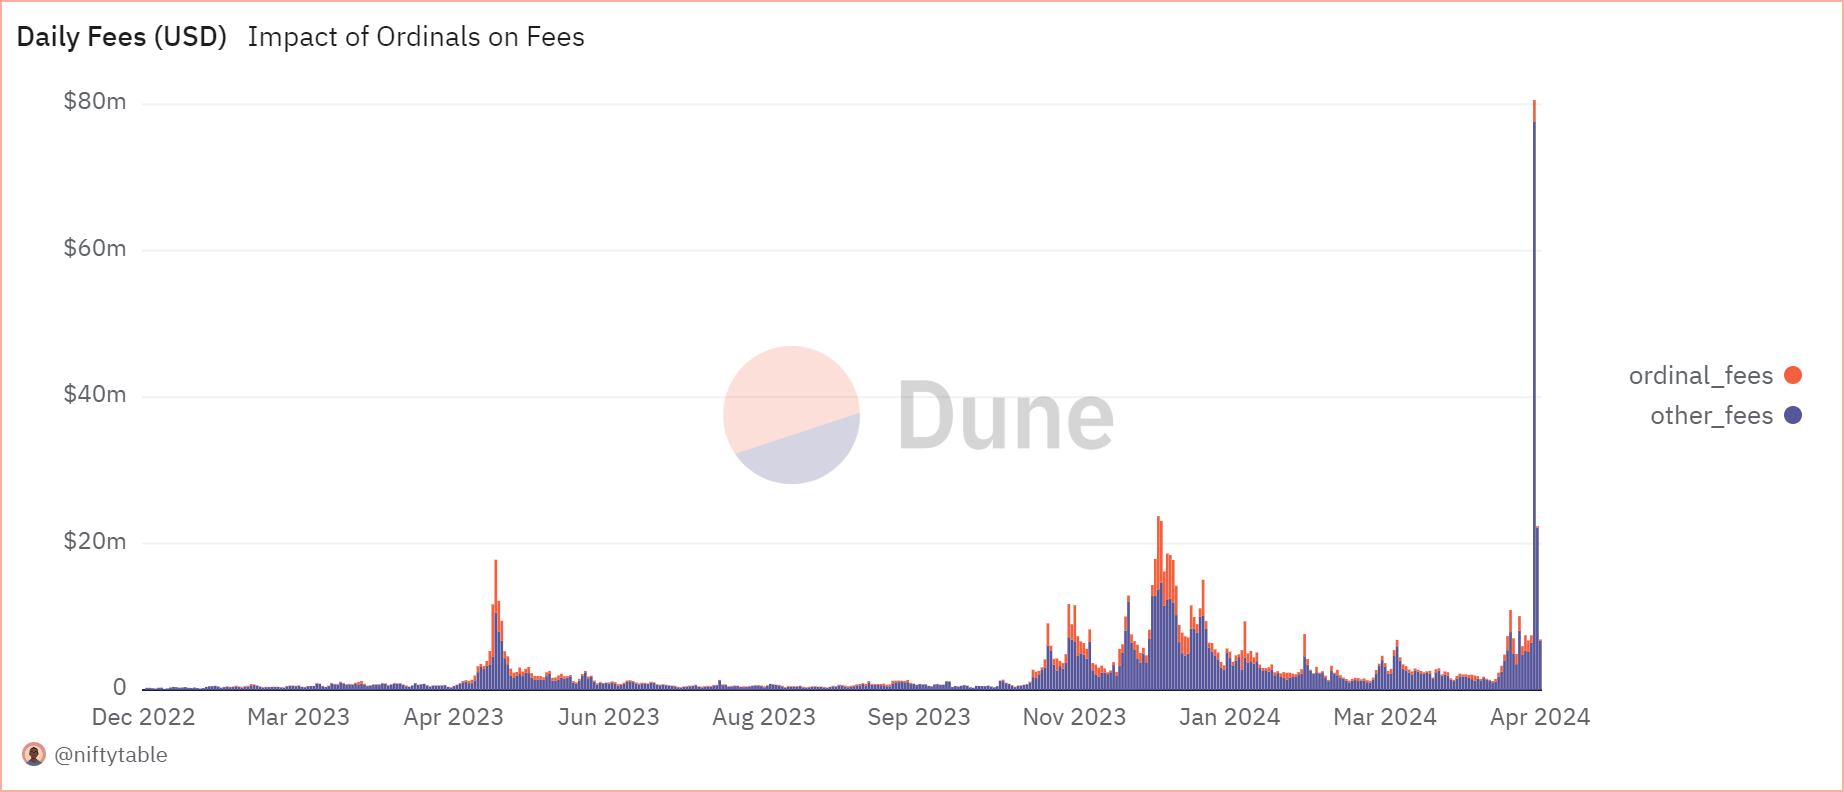 Bitcoin registered an all-time high in fees paid thanks to Runes.